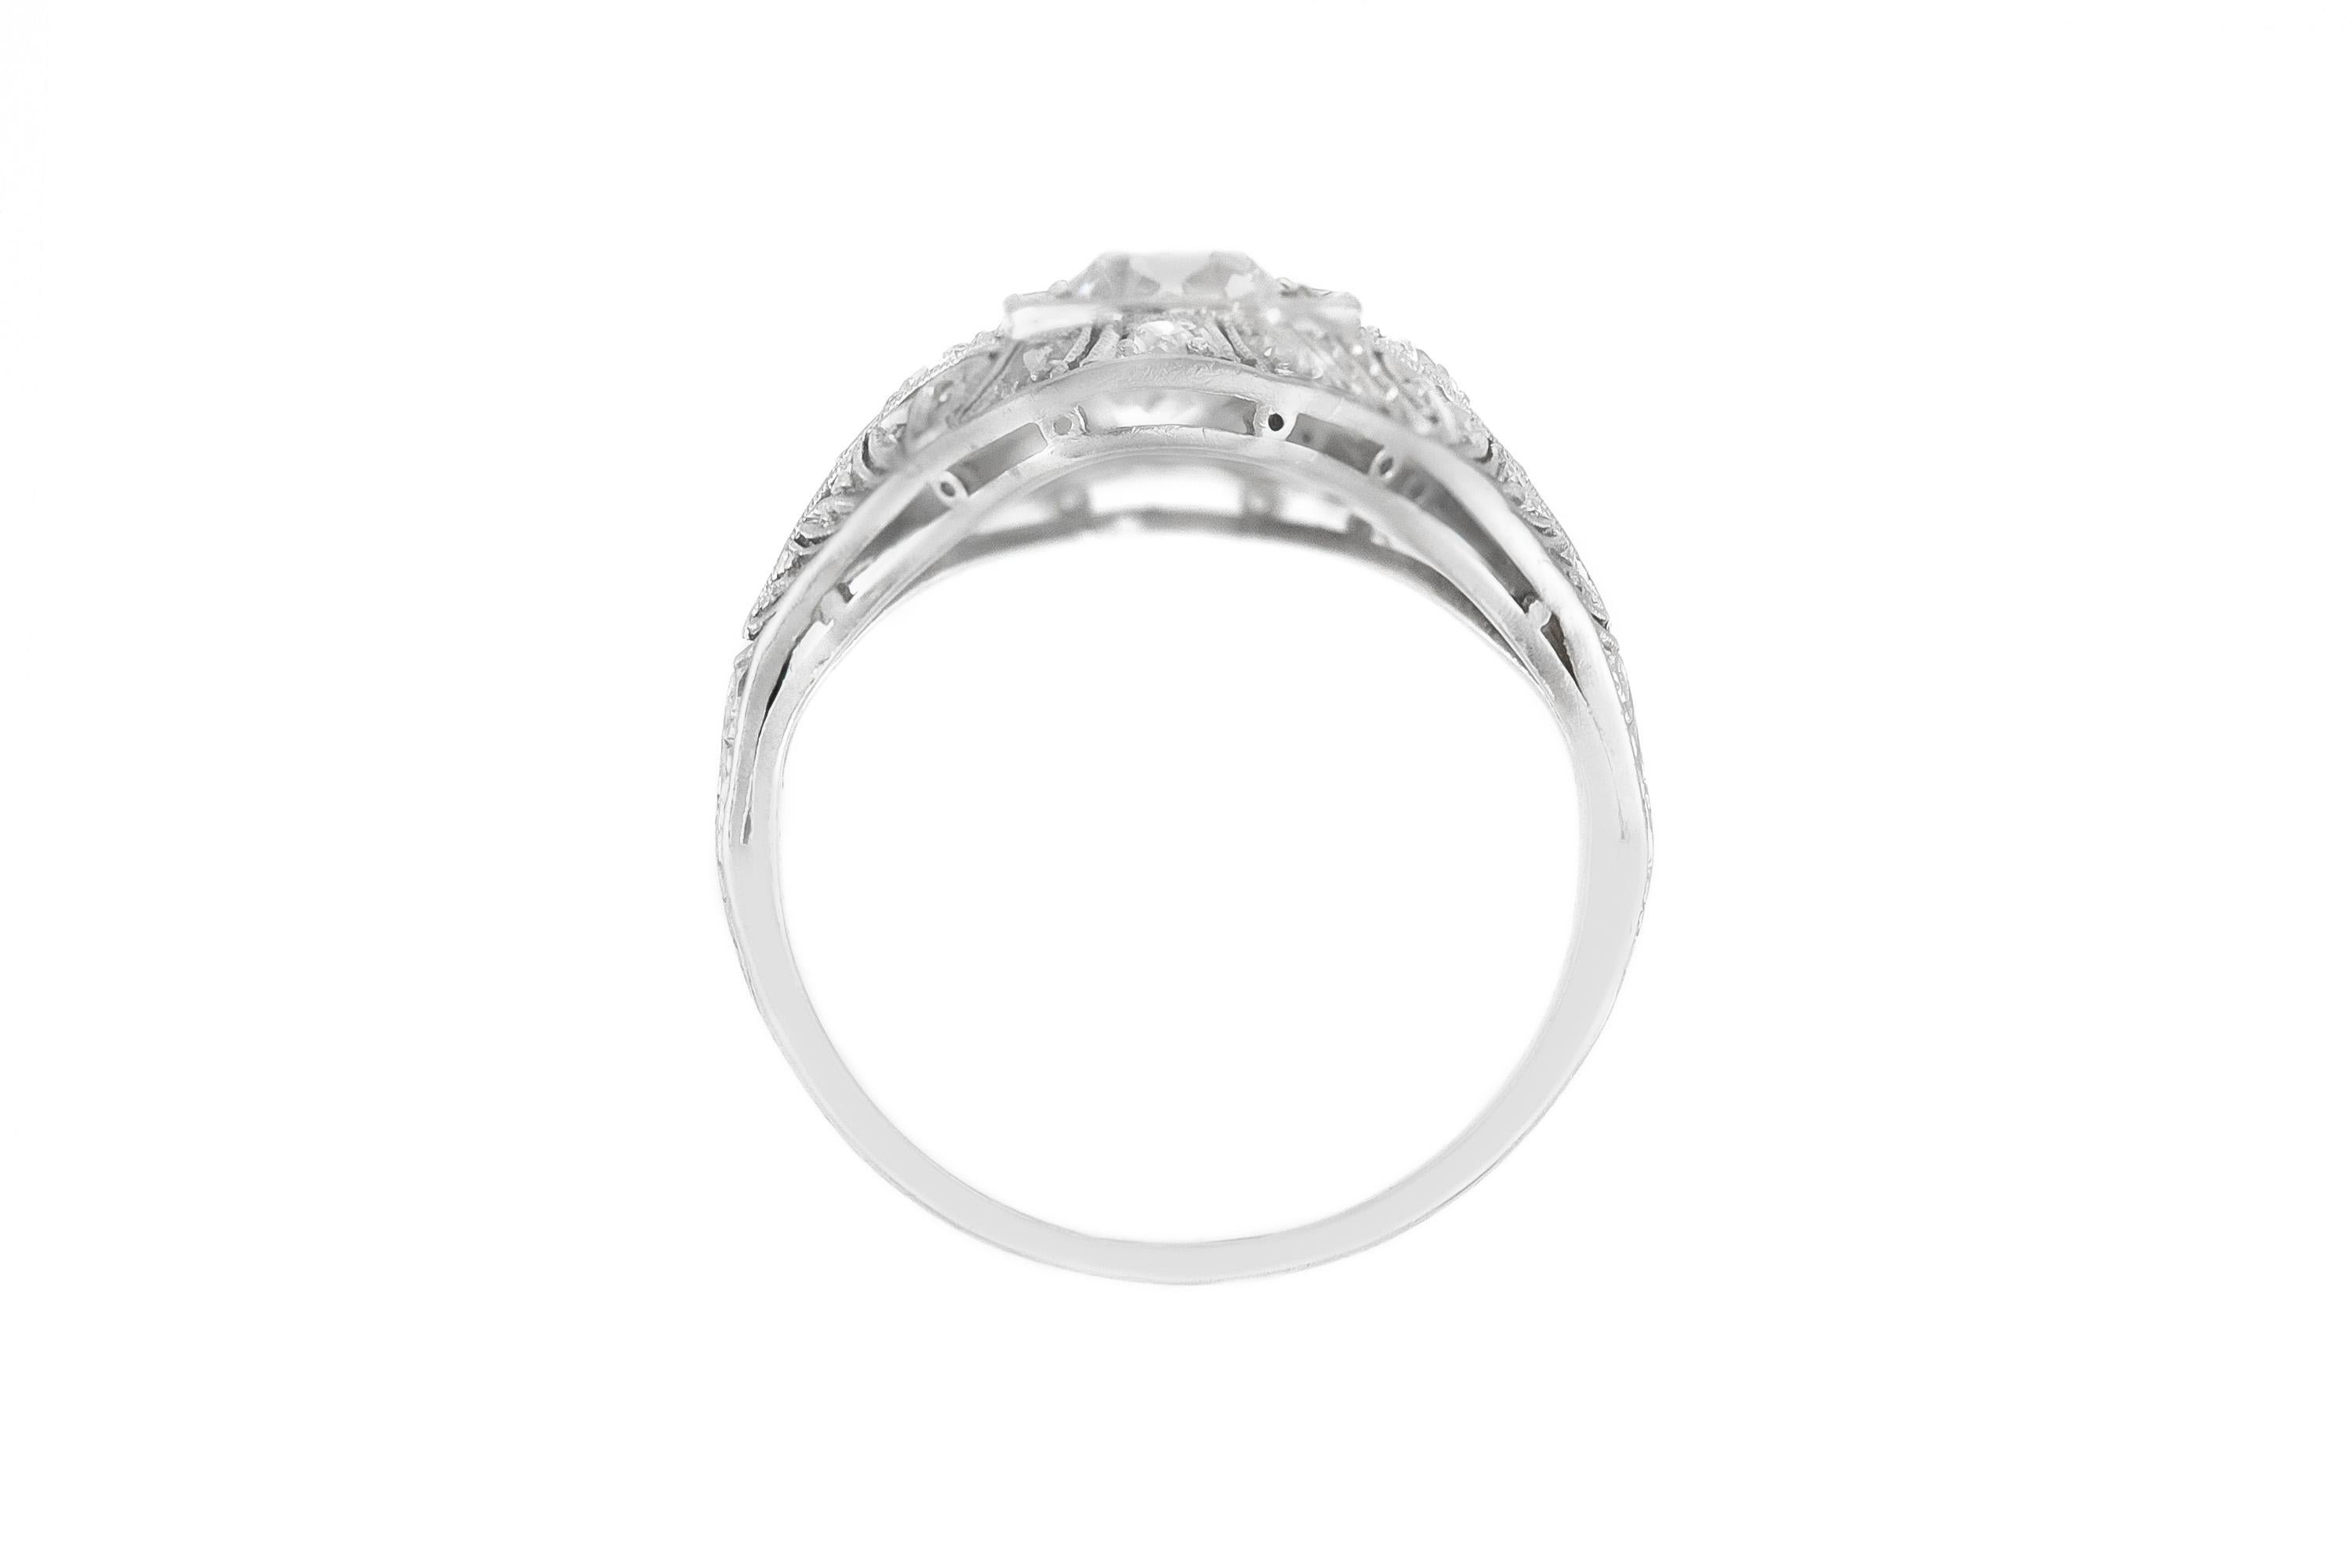 The ring is finely crafted in platinum with diamonds weighing approximately total of 1.90 carat.
Sizre 6.00 (easy to resize )
Circa 1930.